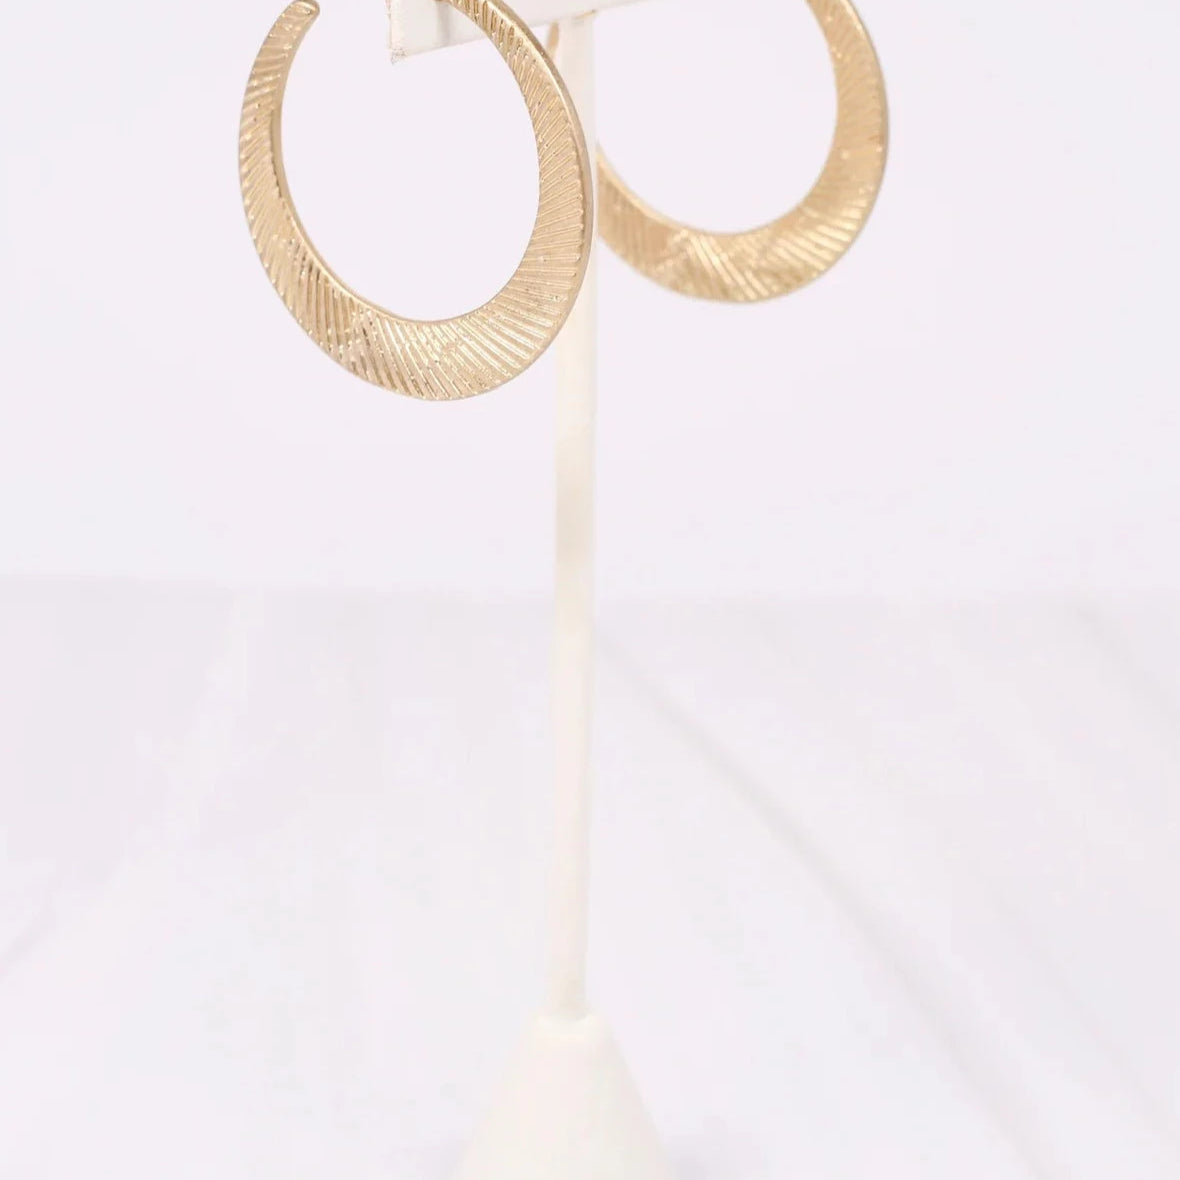 Torres Textured Hoop Earring Gold-Earrings-Caroline Hill-LouisGeorge Boutique, Women’s Fashion Boutique Located in Trussville, Alabama